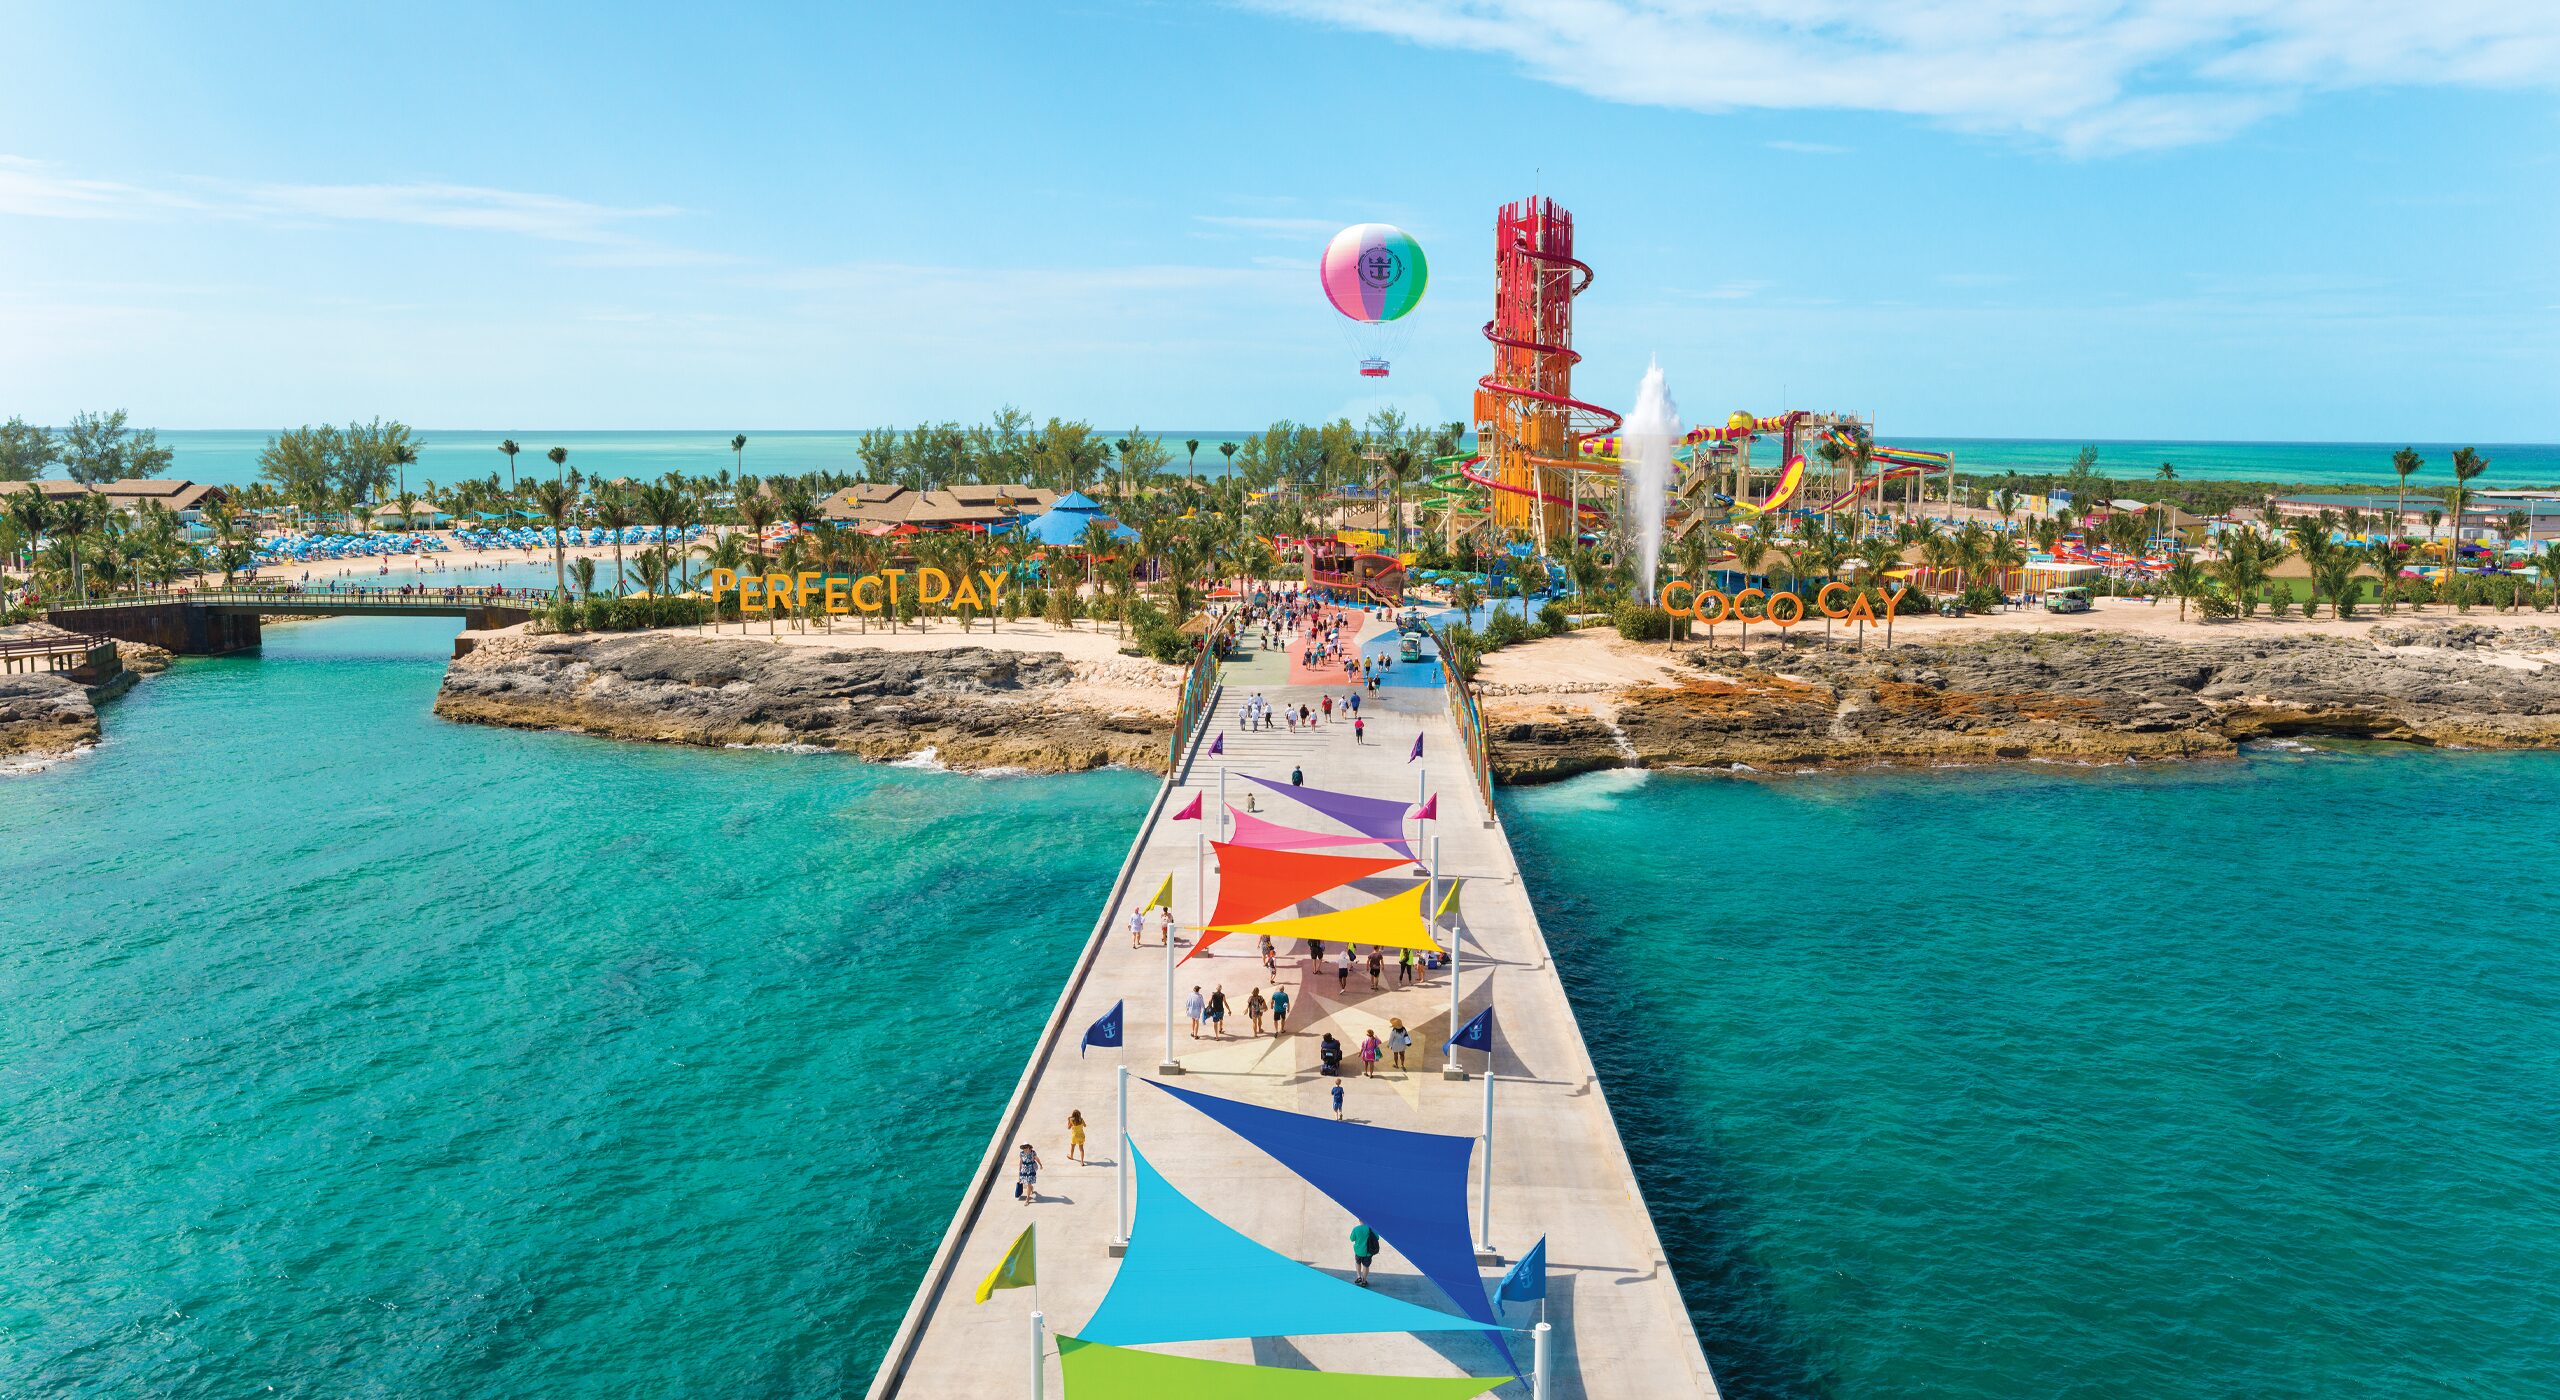 CRUISES TO PERFECT DAY AT COCOCAY